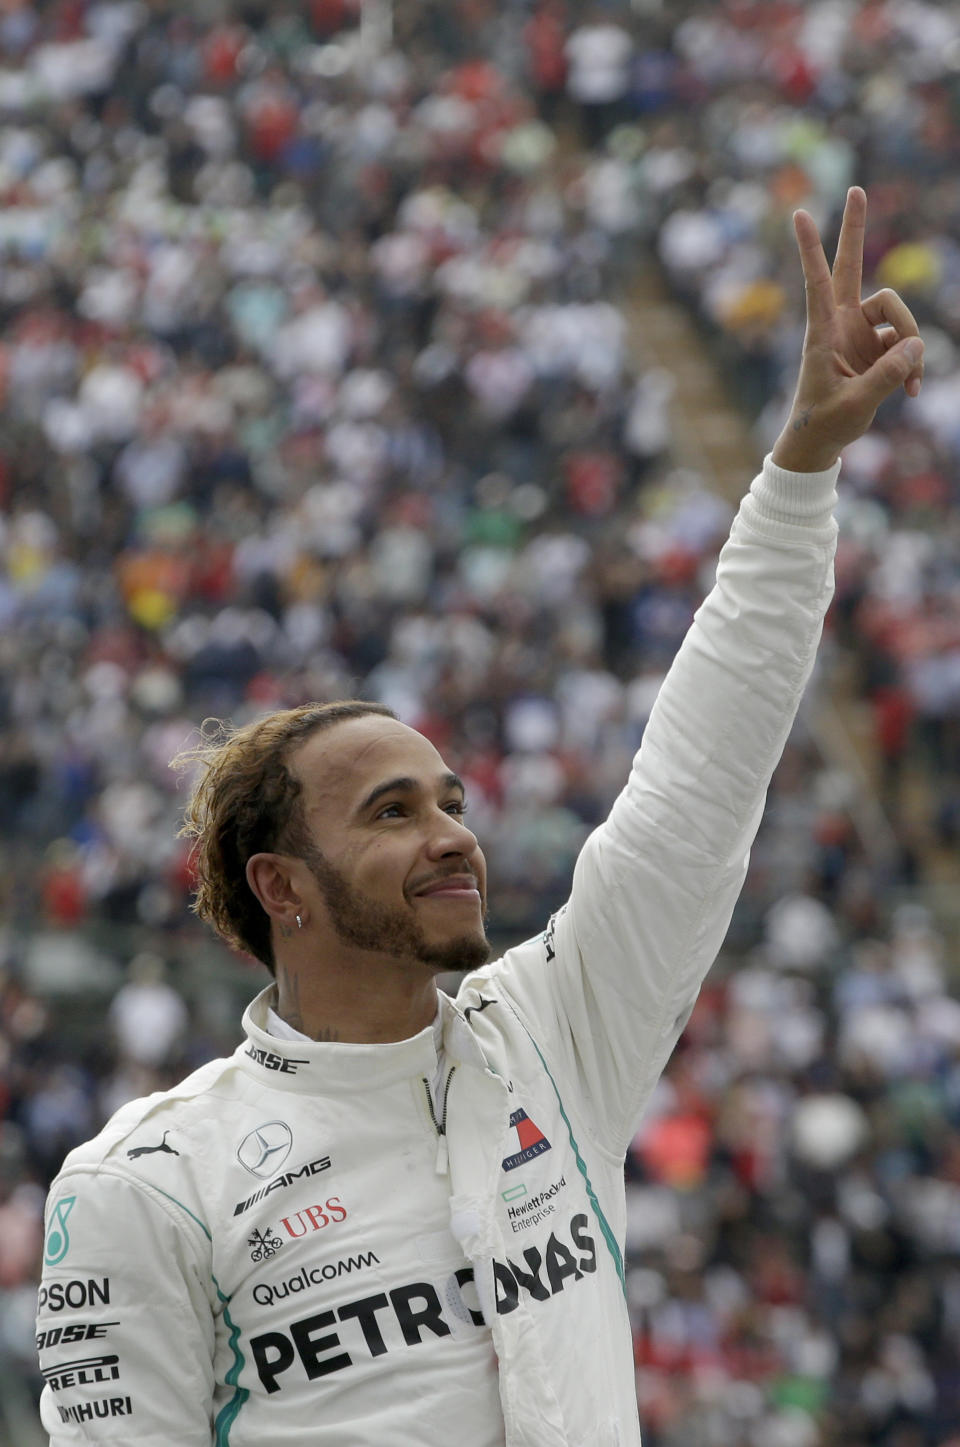 Mercedes driver Lewis Hamilton, of Britain, flashes a victory sign after becoming Formula One champion in the Mexico Grand Prix auto race at the Hermanos Rodriguez racetrack in Mexico City, Sunday, Oct. 28, 2018. (AP Photo/Moises Castillo)